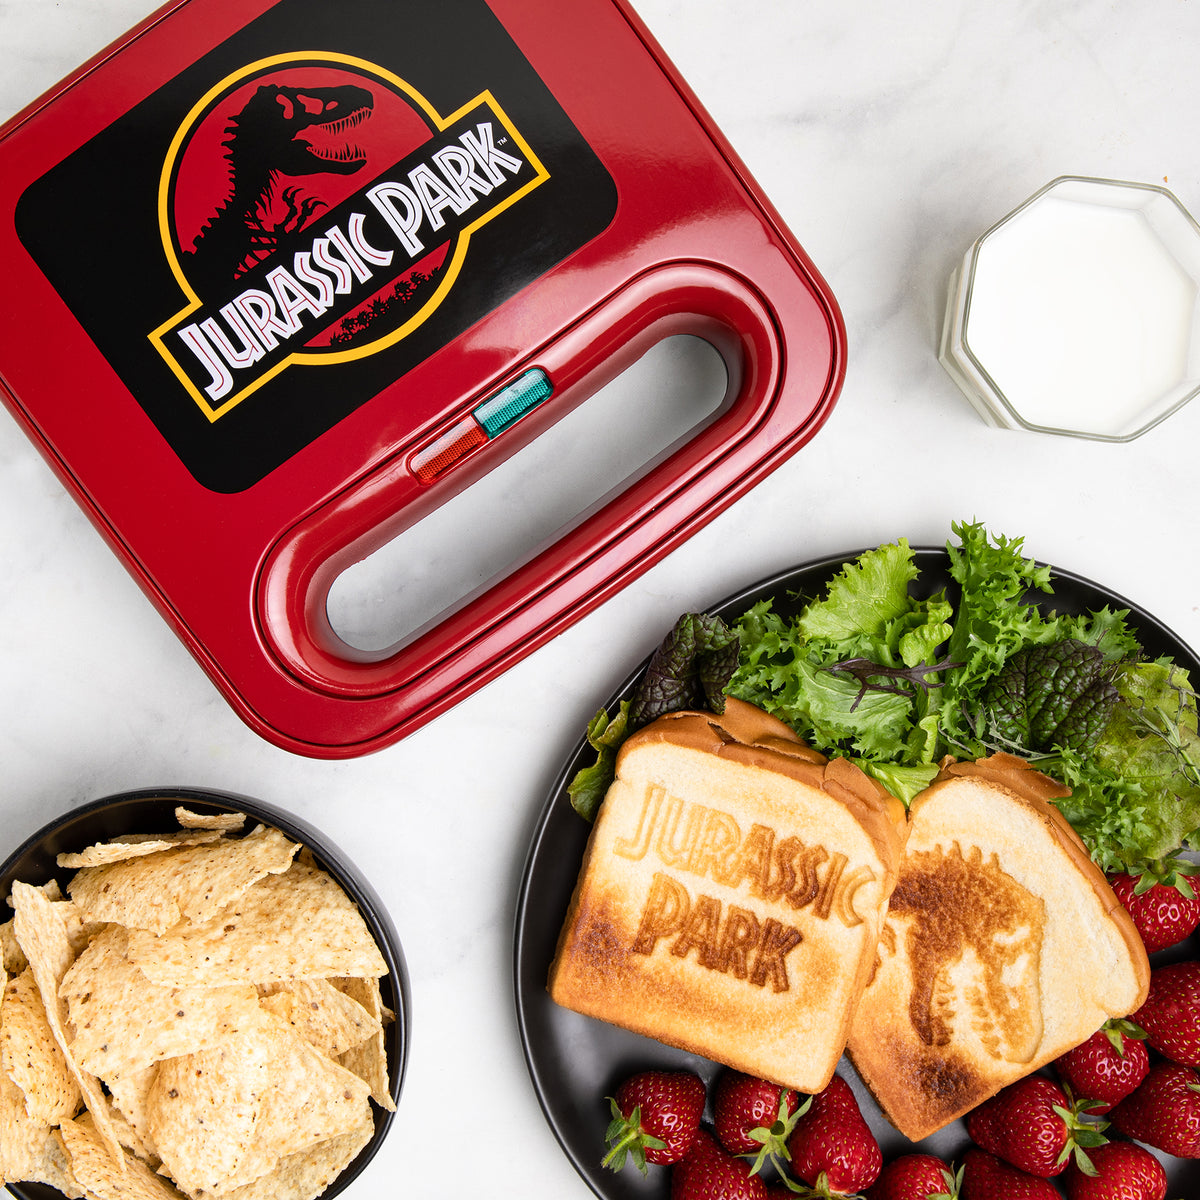 Uncanny Brands The Mandalorian Grilled Cheese Maker- Panini Press